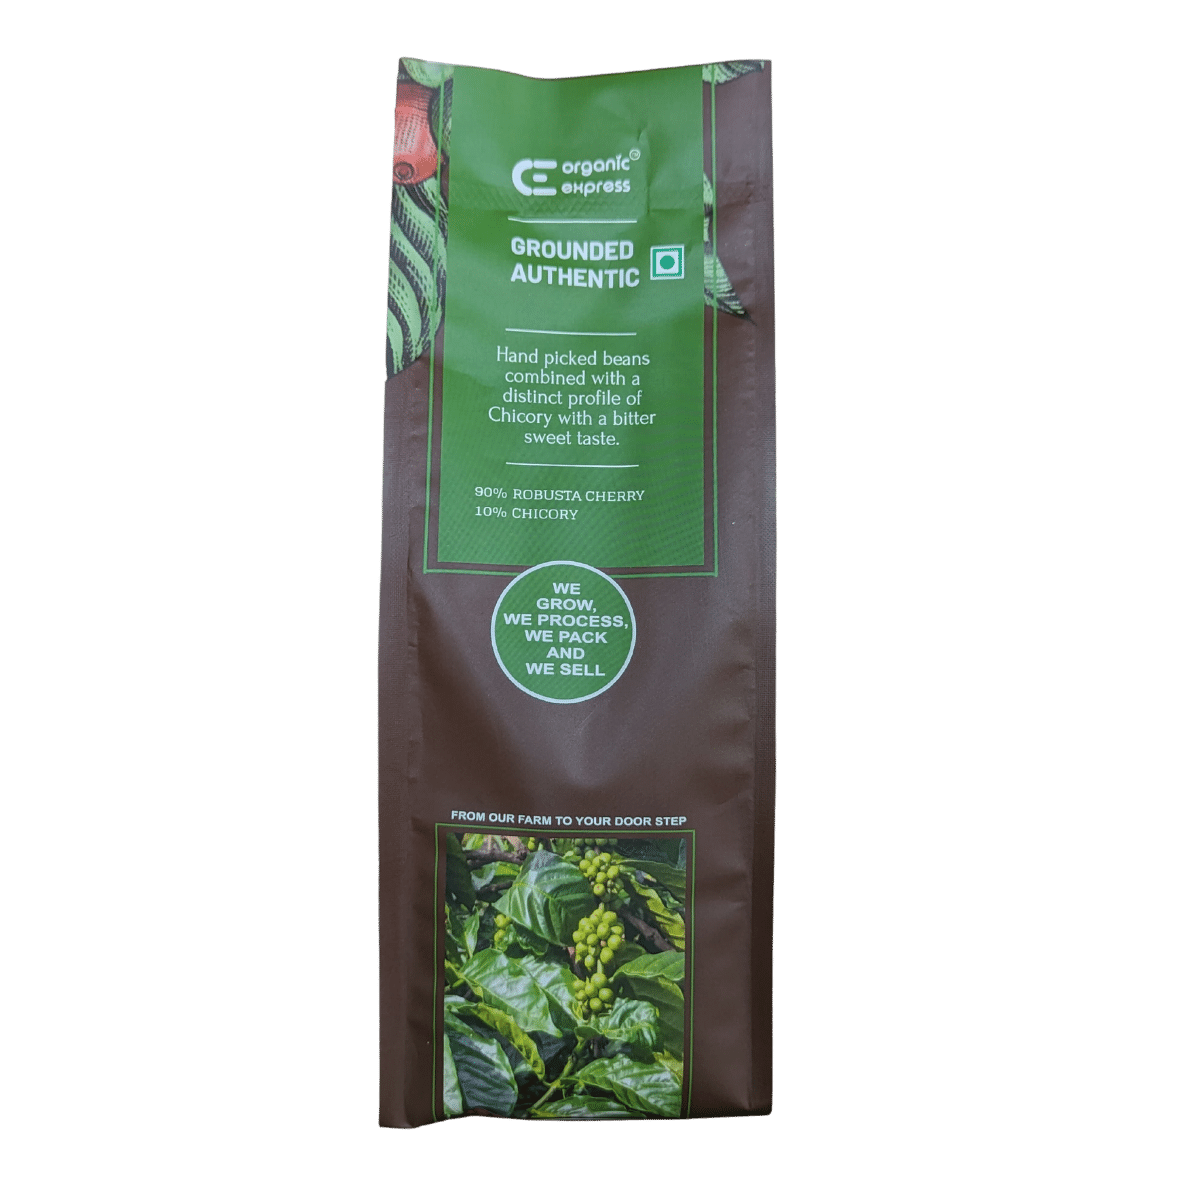 Organic-Express-Grounded-Authentic-Filter-Coffee-Powder